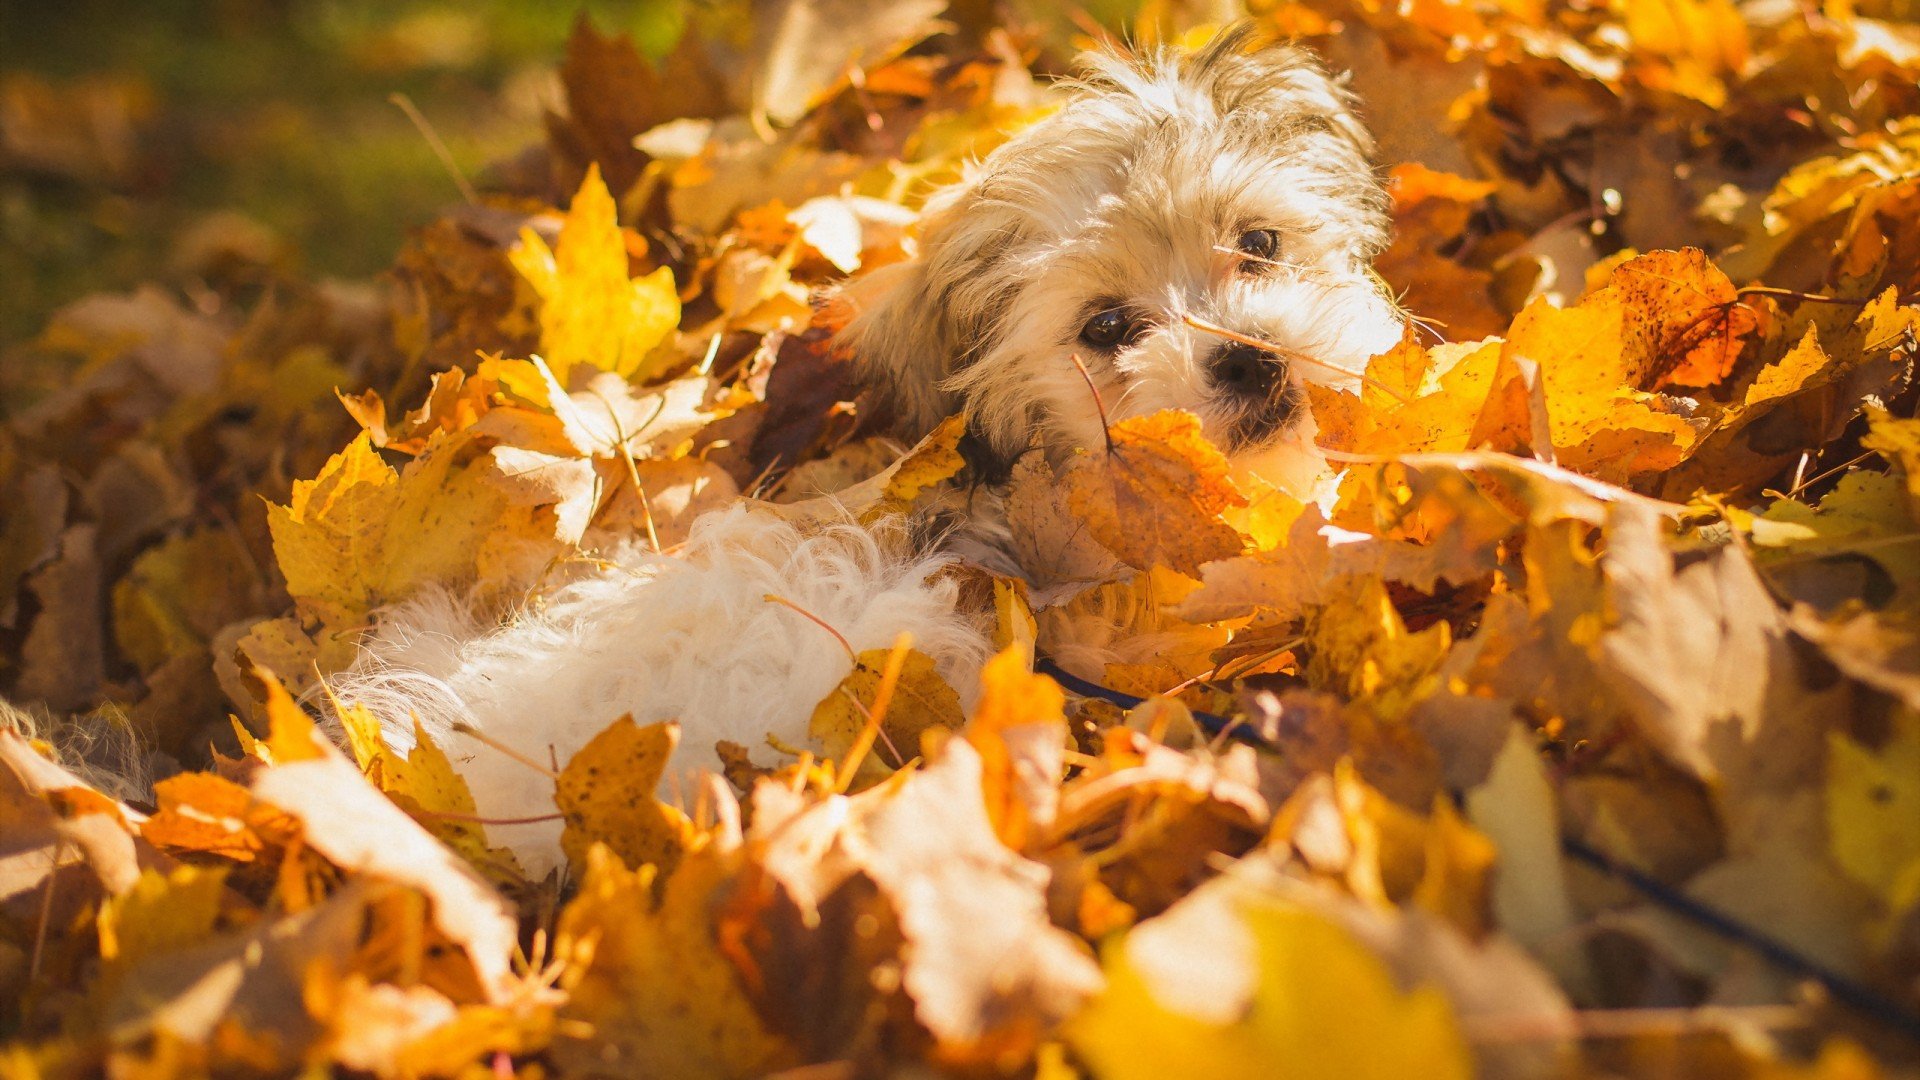 Dog in autumn leaves wallpapers and images   wallpapers pictures